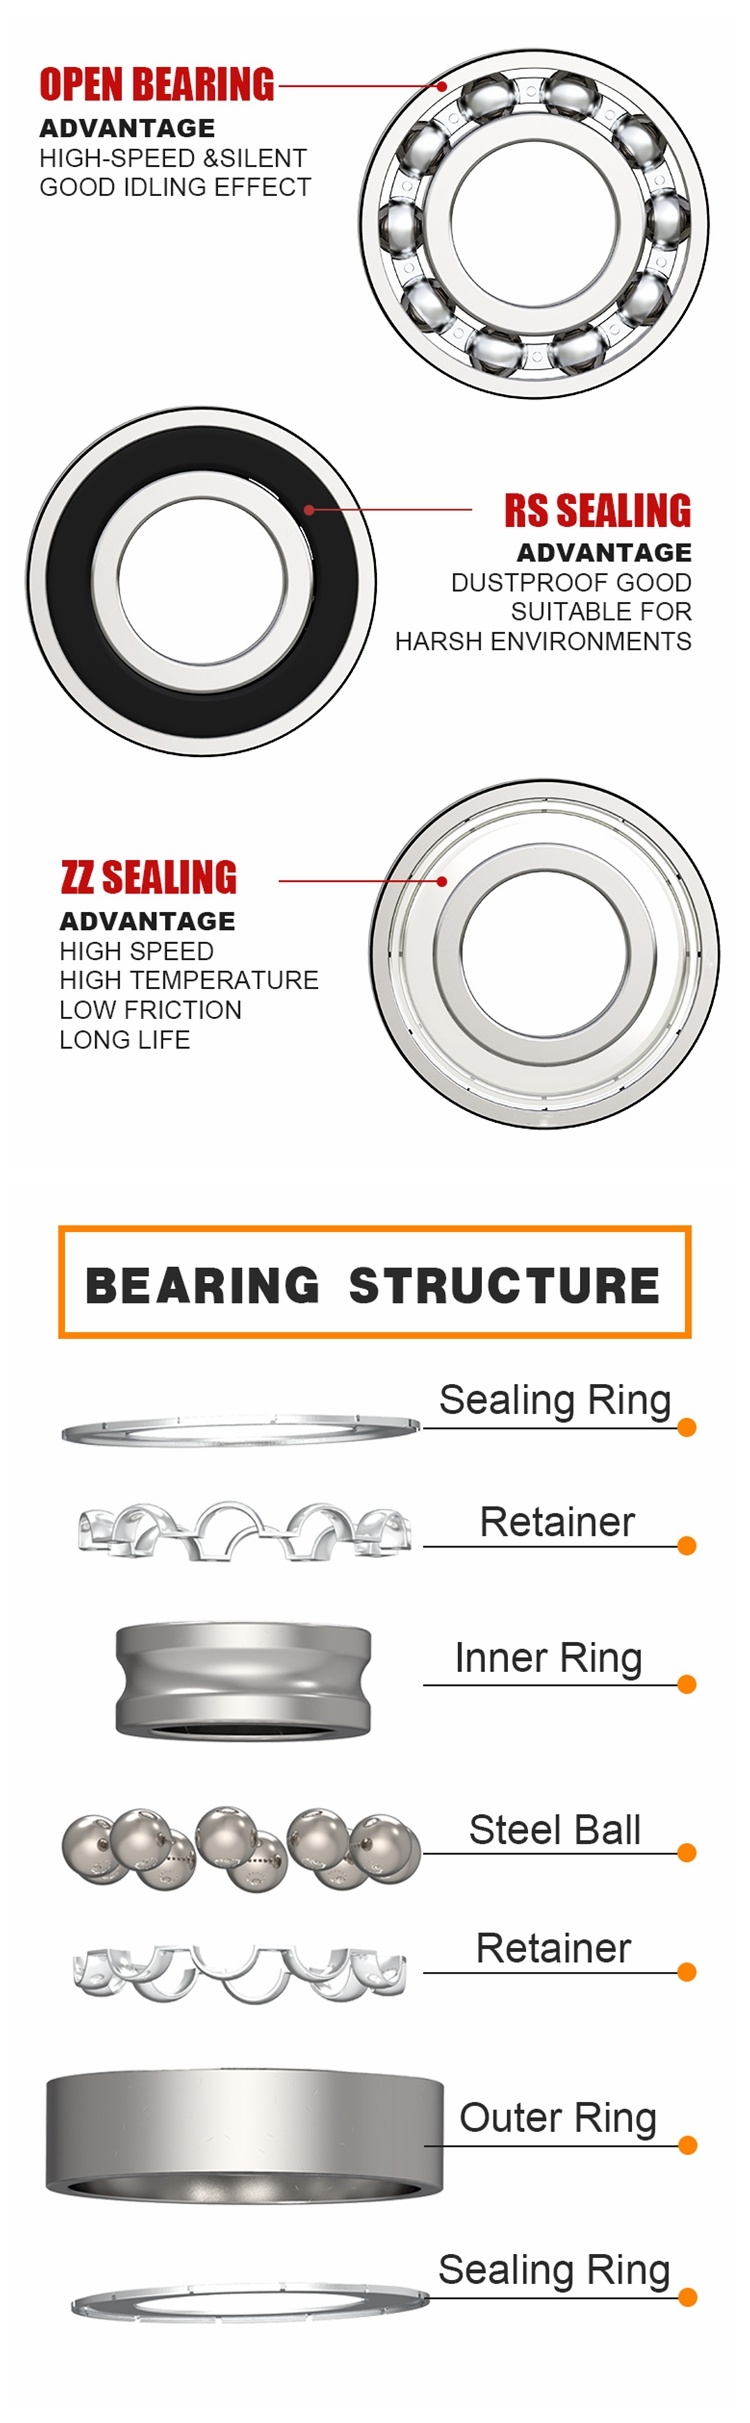 Motor Clearance Spindle Bearing Rubber Cover 16008 Zz Ball Bearings